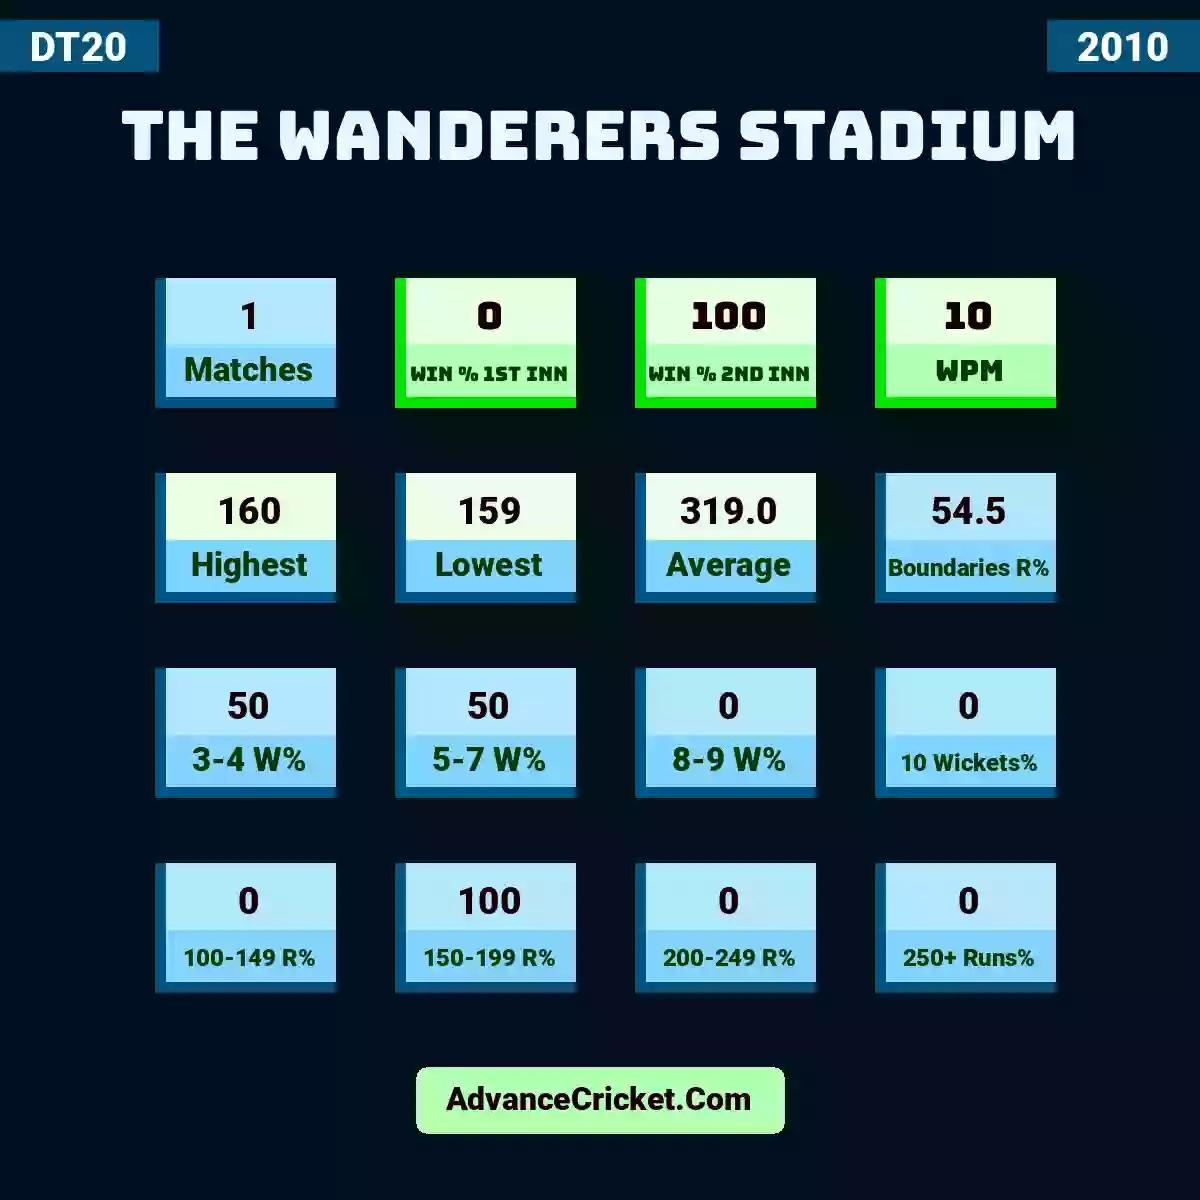 Image showing The Wanderers Stadium with Matches: 1, Win % 1st Inn: 0, Win % 2nd Inn: 100, WPM: 10, Highest: 160, Lowest: 159, Average: 319.0, Boundaries R%: 54.5, 3-4 W%: 50, 5-7 W%: 50, 8-9 W%: 0, 10 Wickets%: 0, 100-149 R%: 0, 150-199 R%: 100, 200-249 R%: 0, 250+ Runs%: 0.